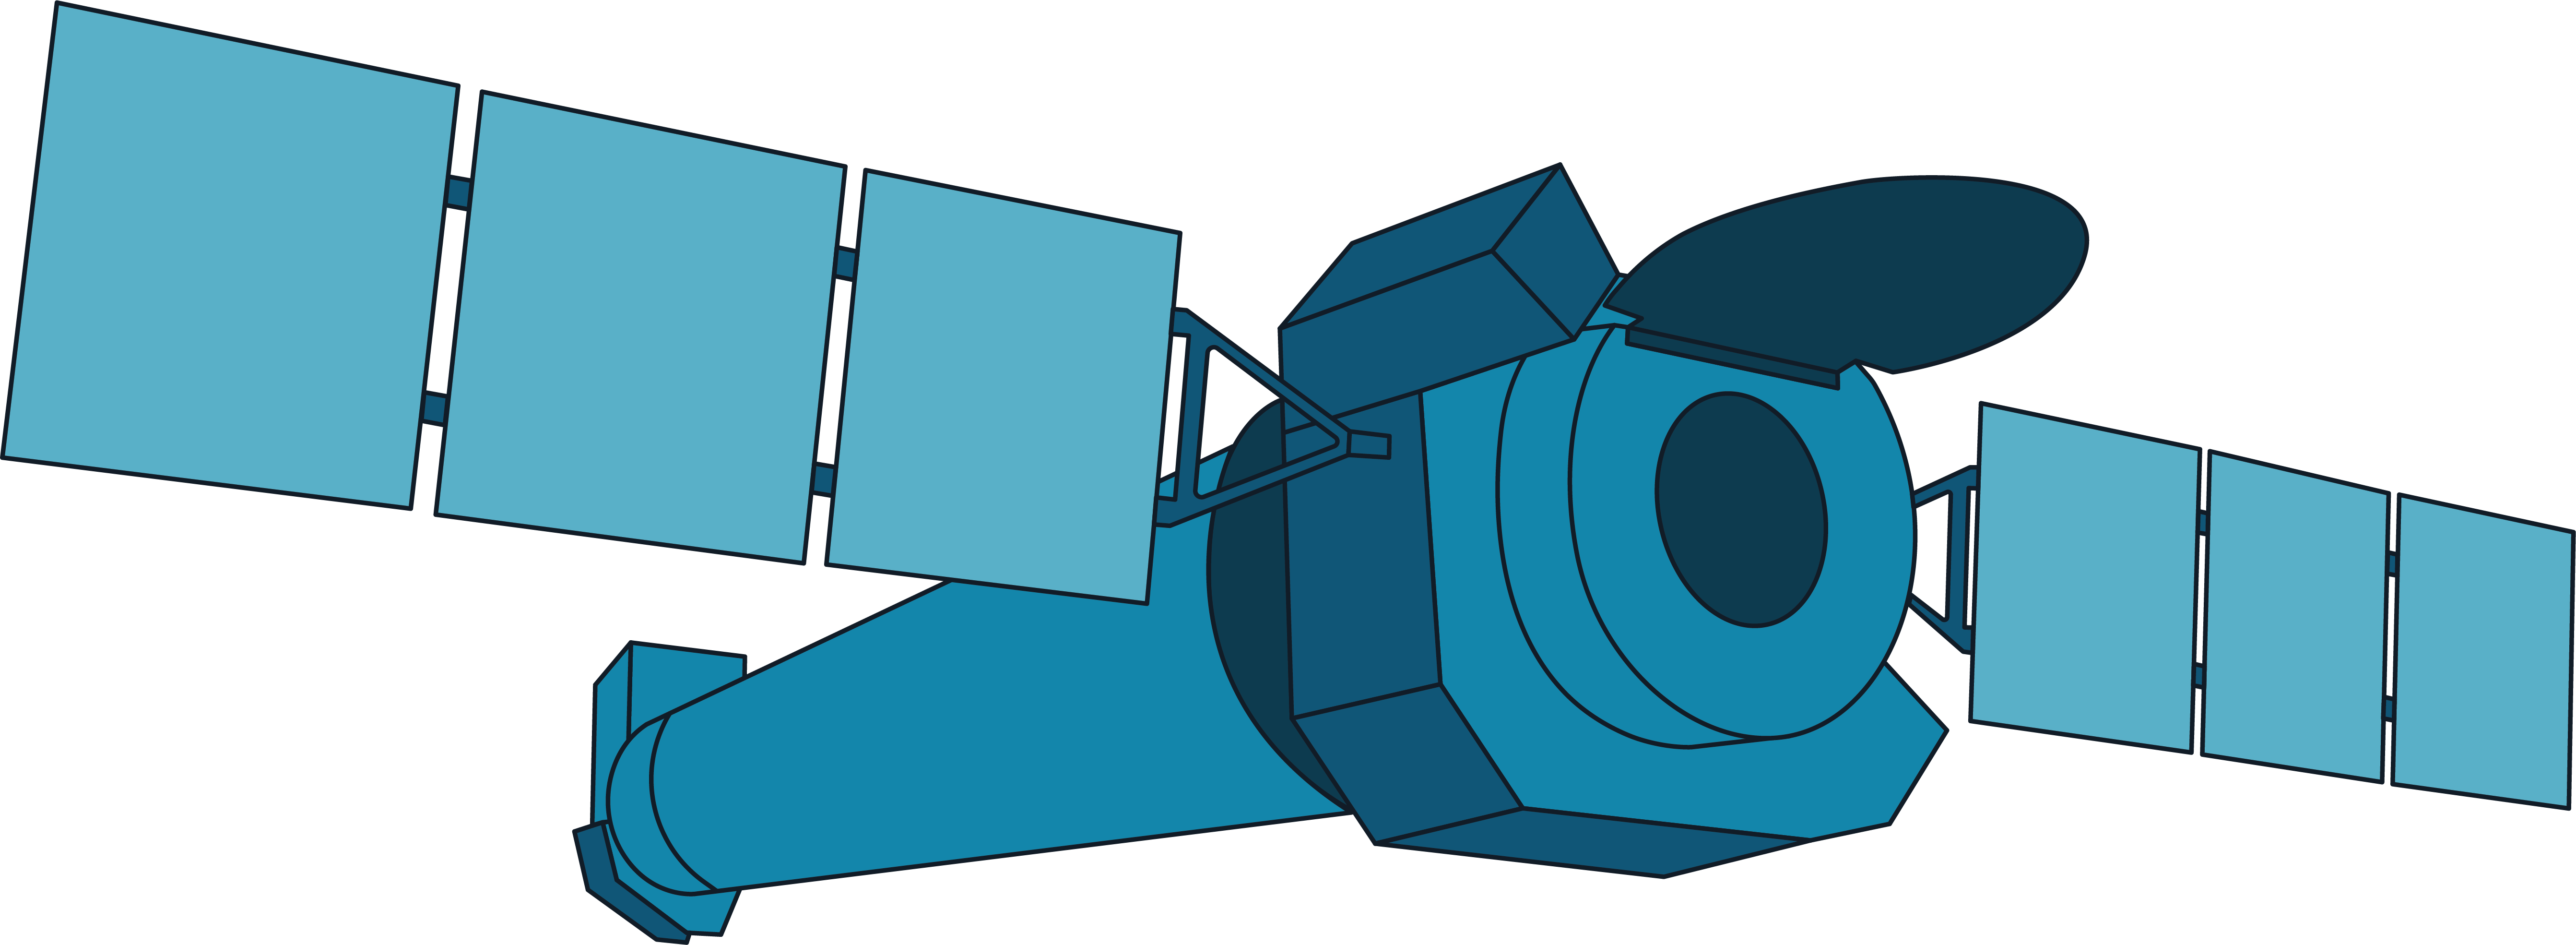 A graphic of Chandra is shown in light and dark blue with a long, cylindrical main body. At the front of this cylinder is a darker circle. Jutting off of the front of the main body are two "wings" of solar arrays.